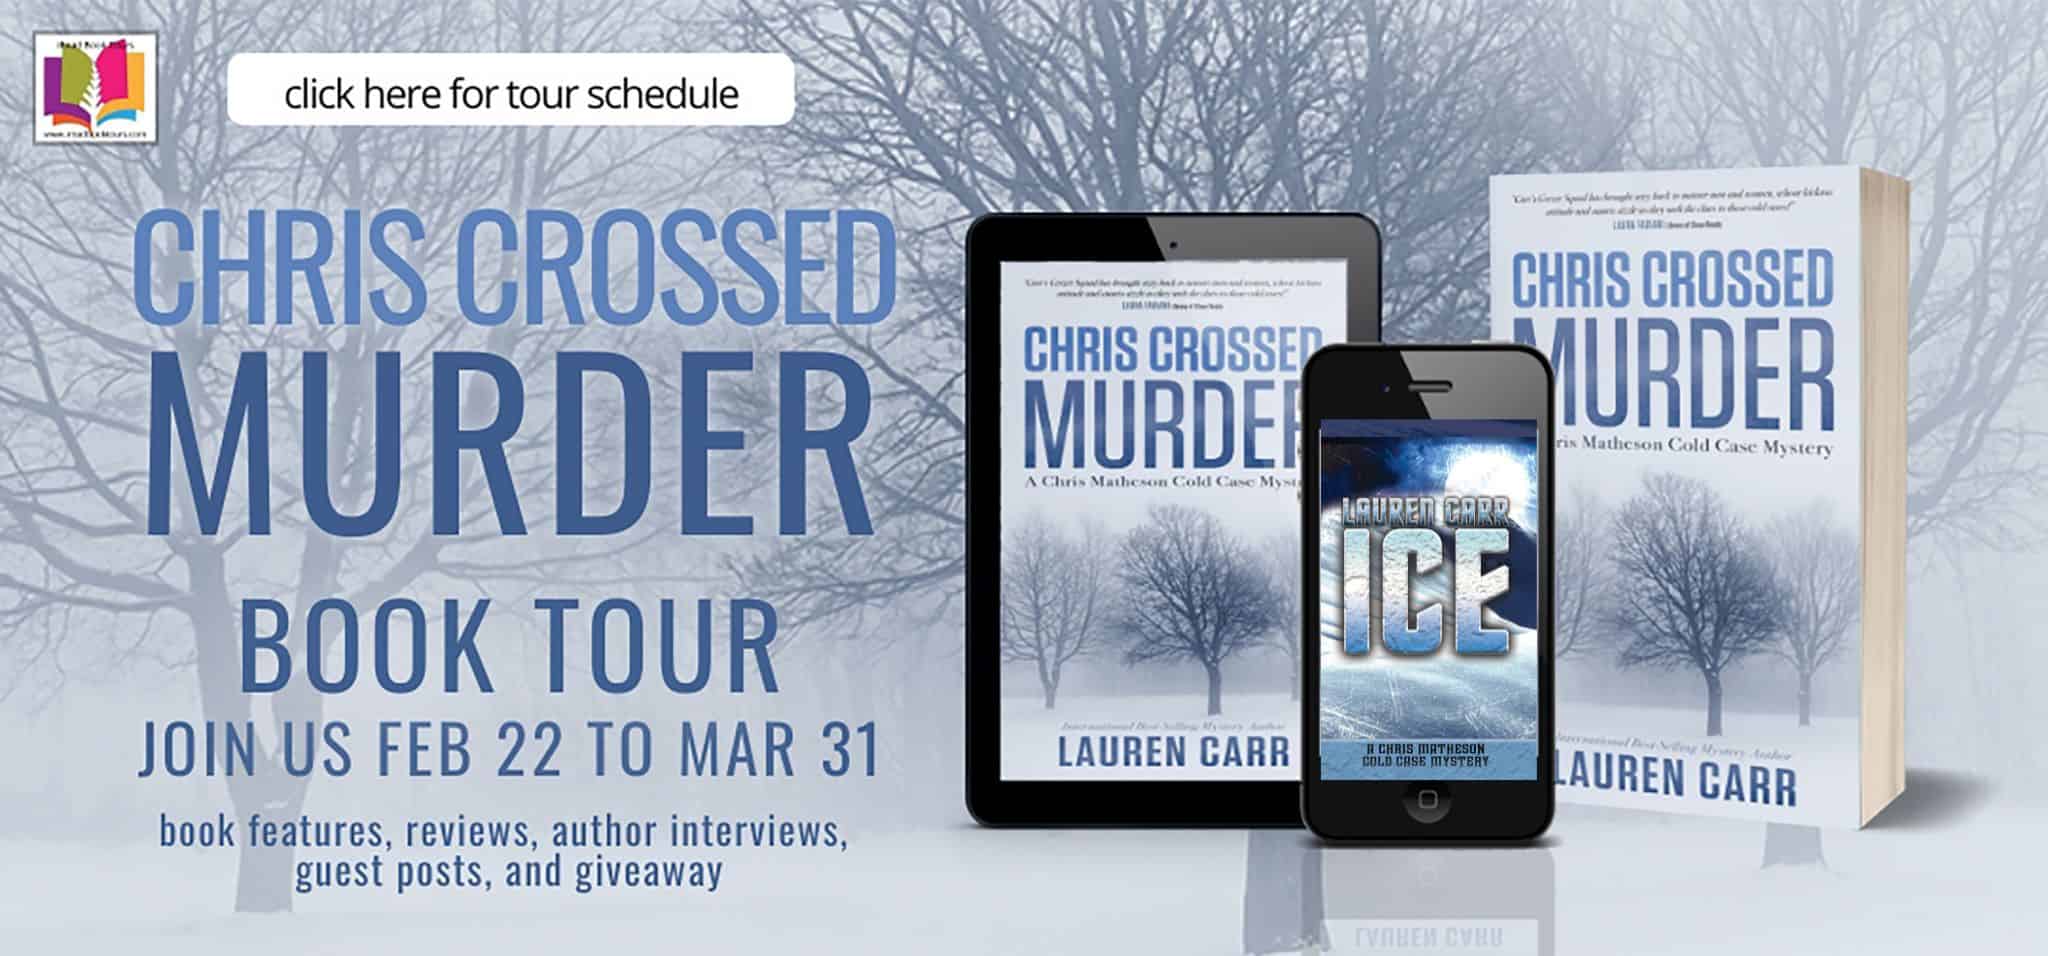 Ice (A Chris Matheson Cold Case Mystery Book 1) by Lauren Carr | Book Review ~ Giveaway